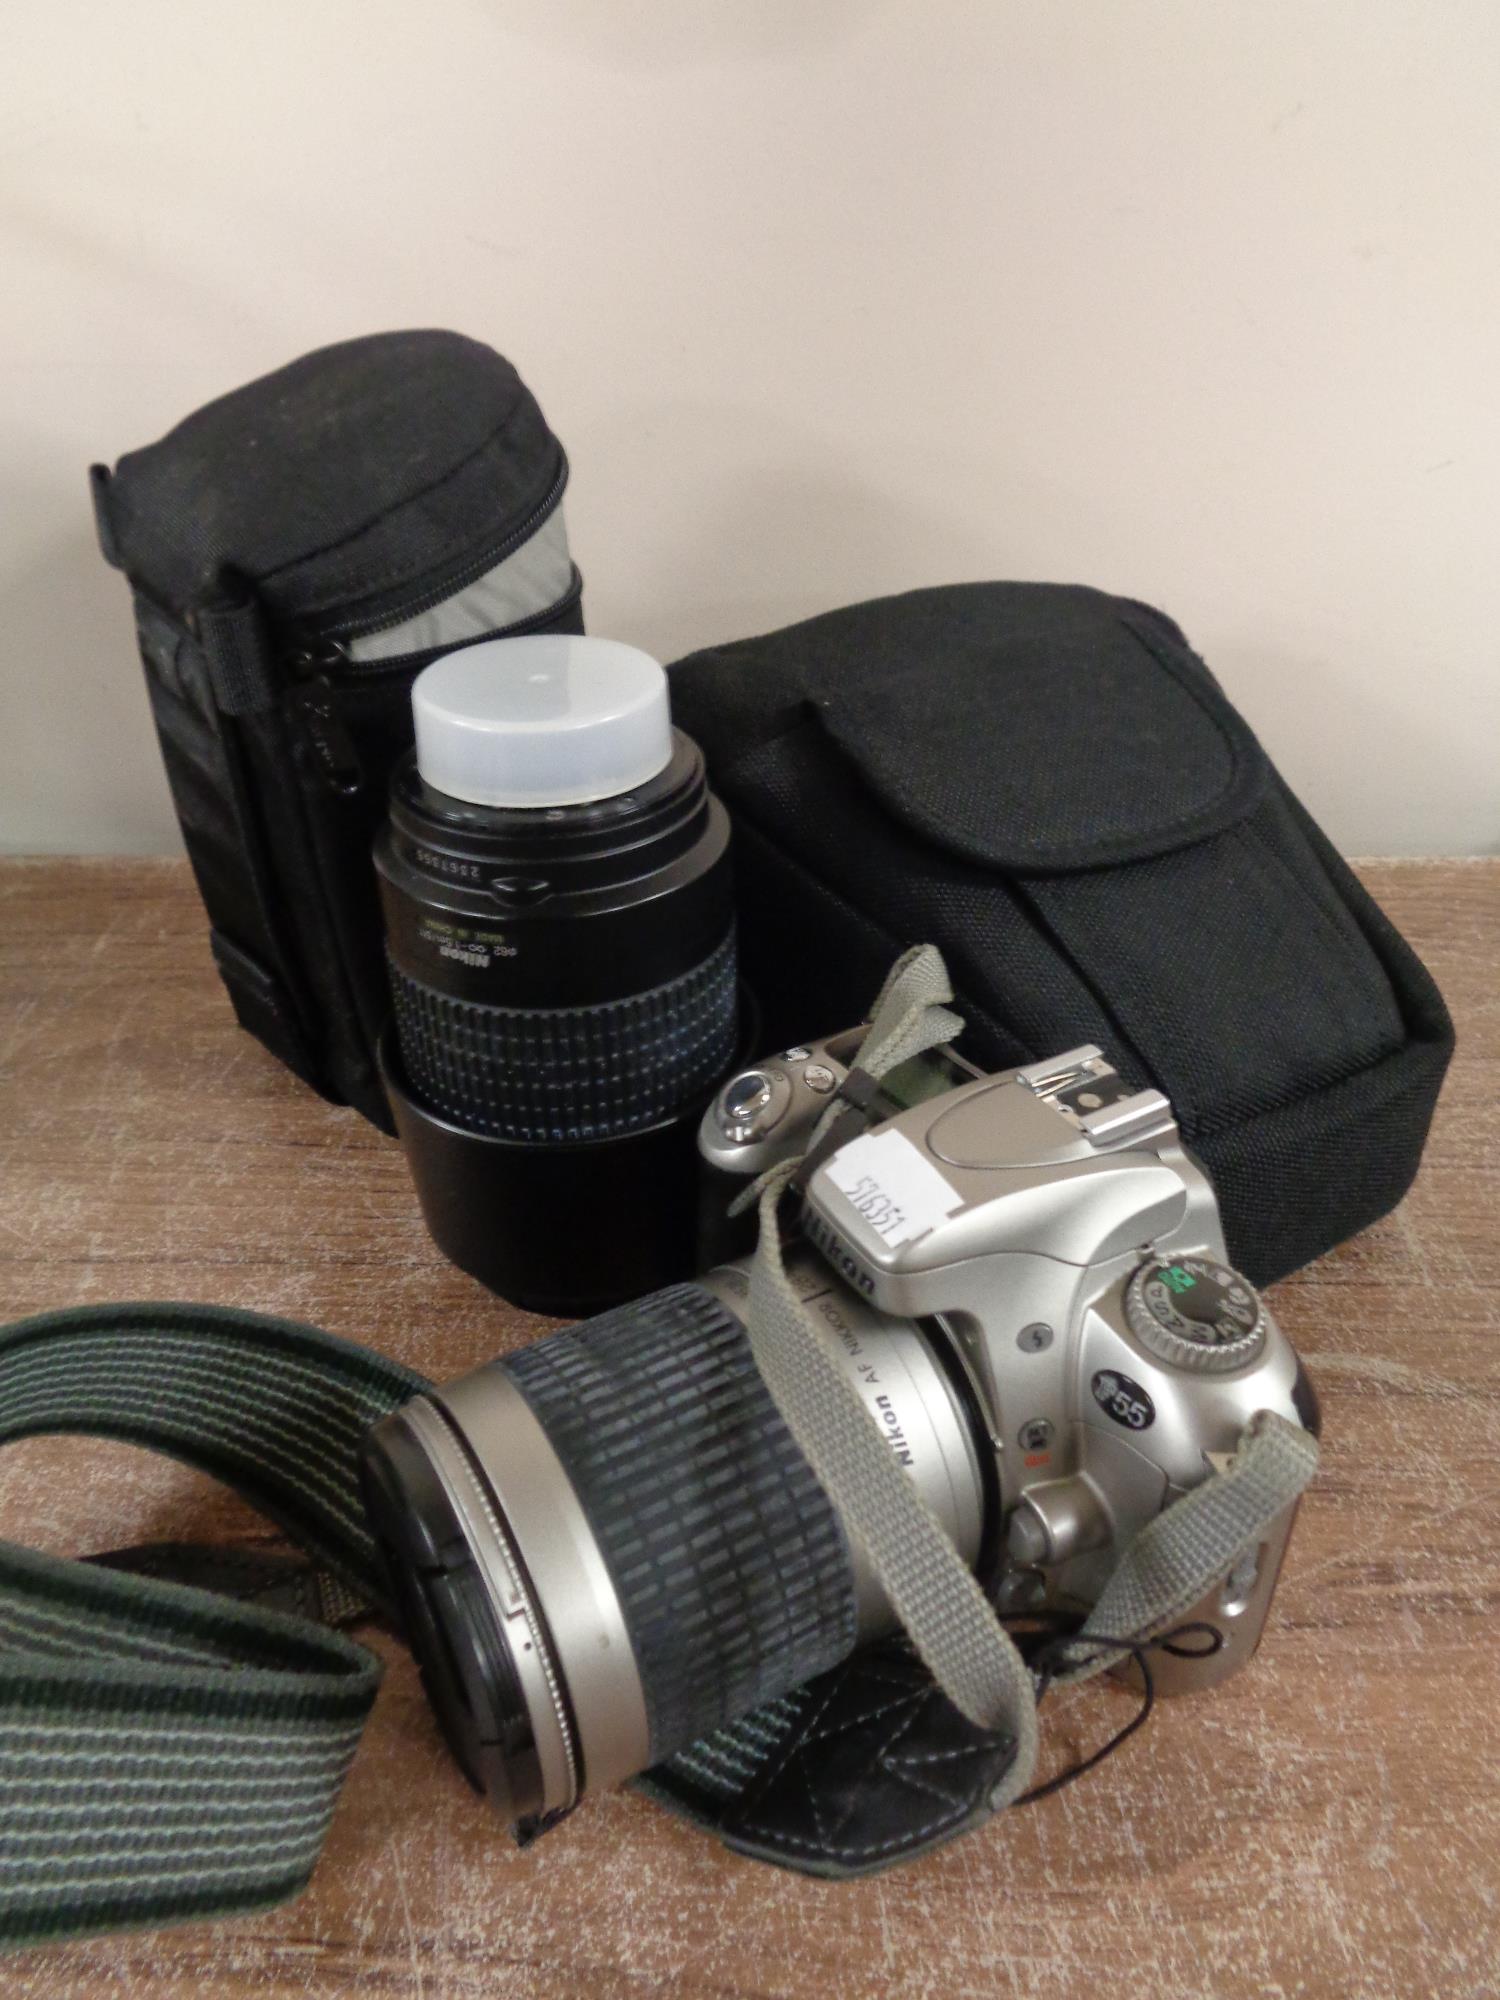 A Nikon F55 camera in case together with Nikon lens in fitted bag and other camera accessories